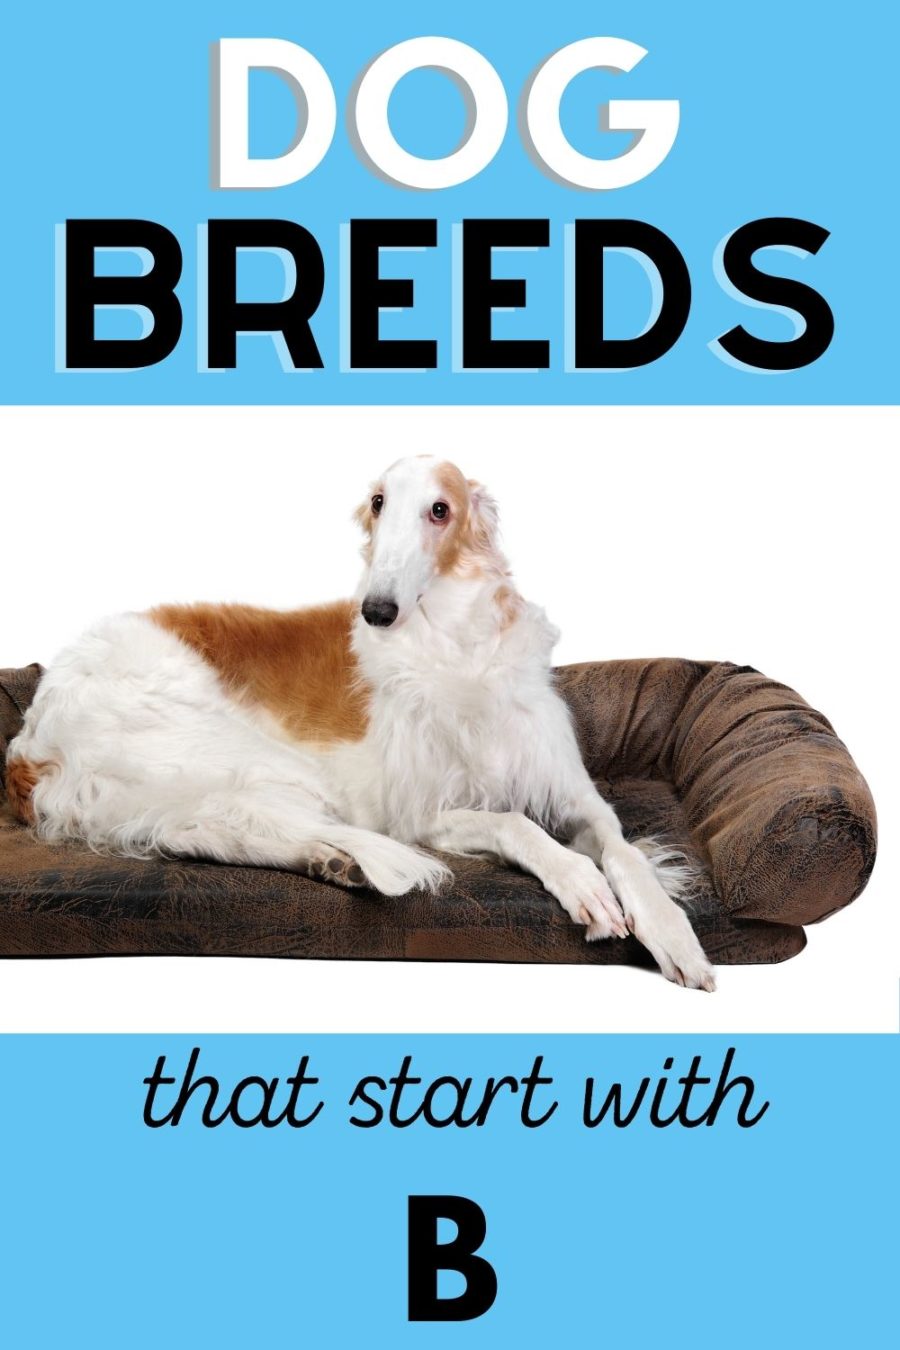 dog breeds that start with B